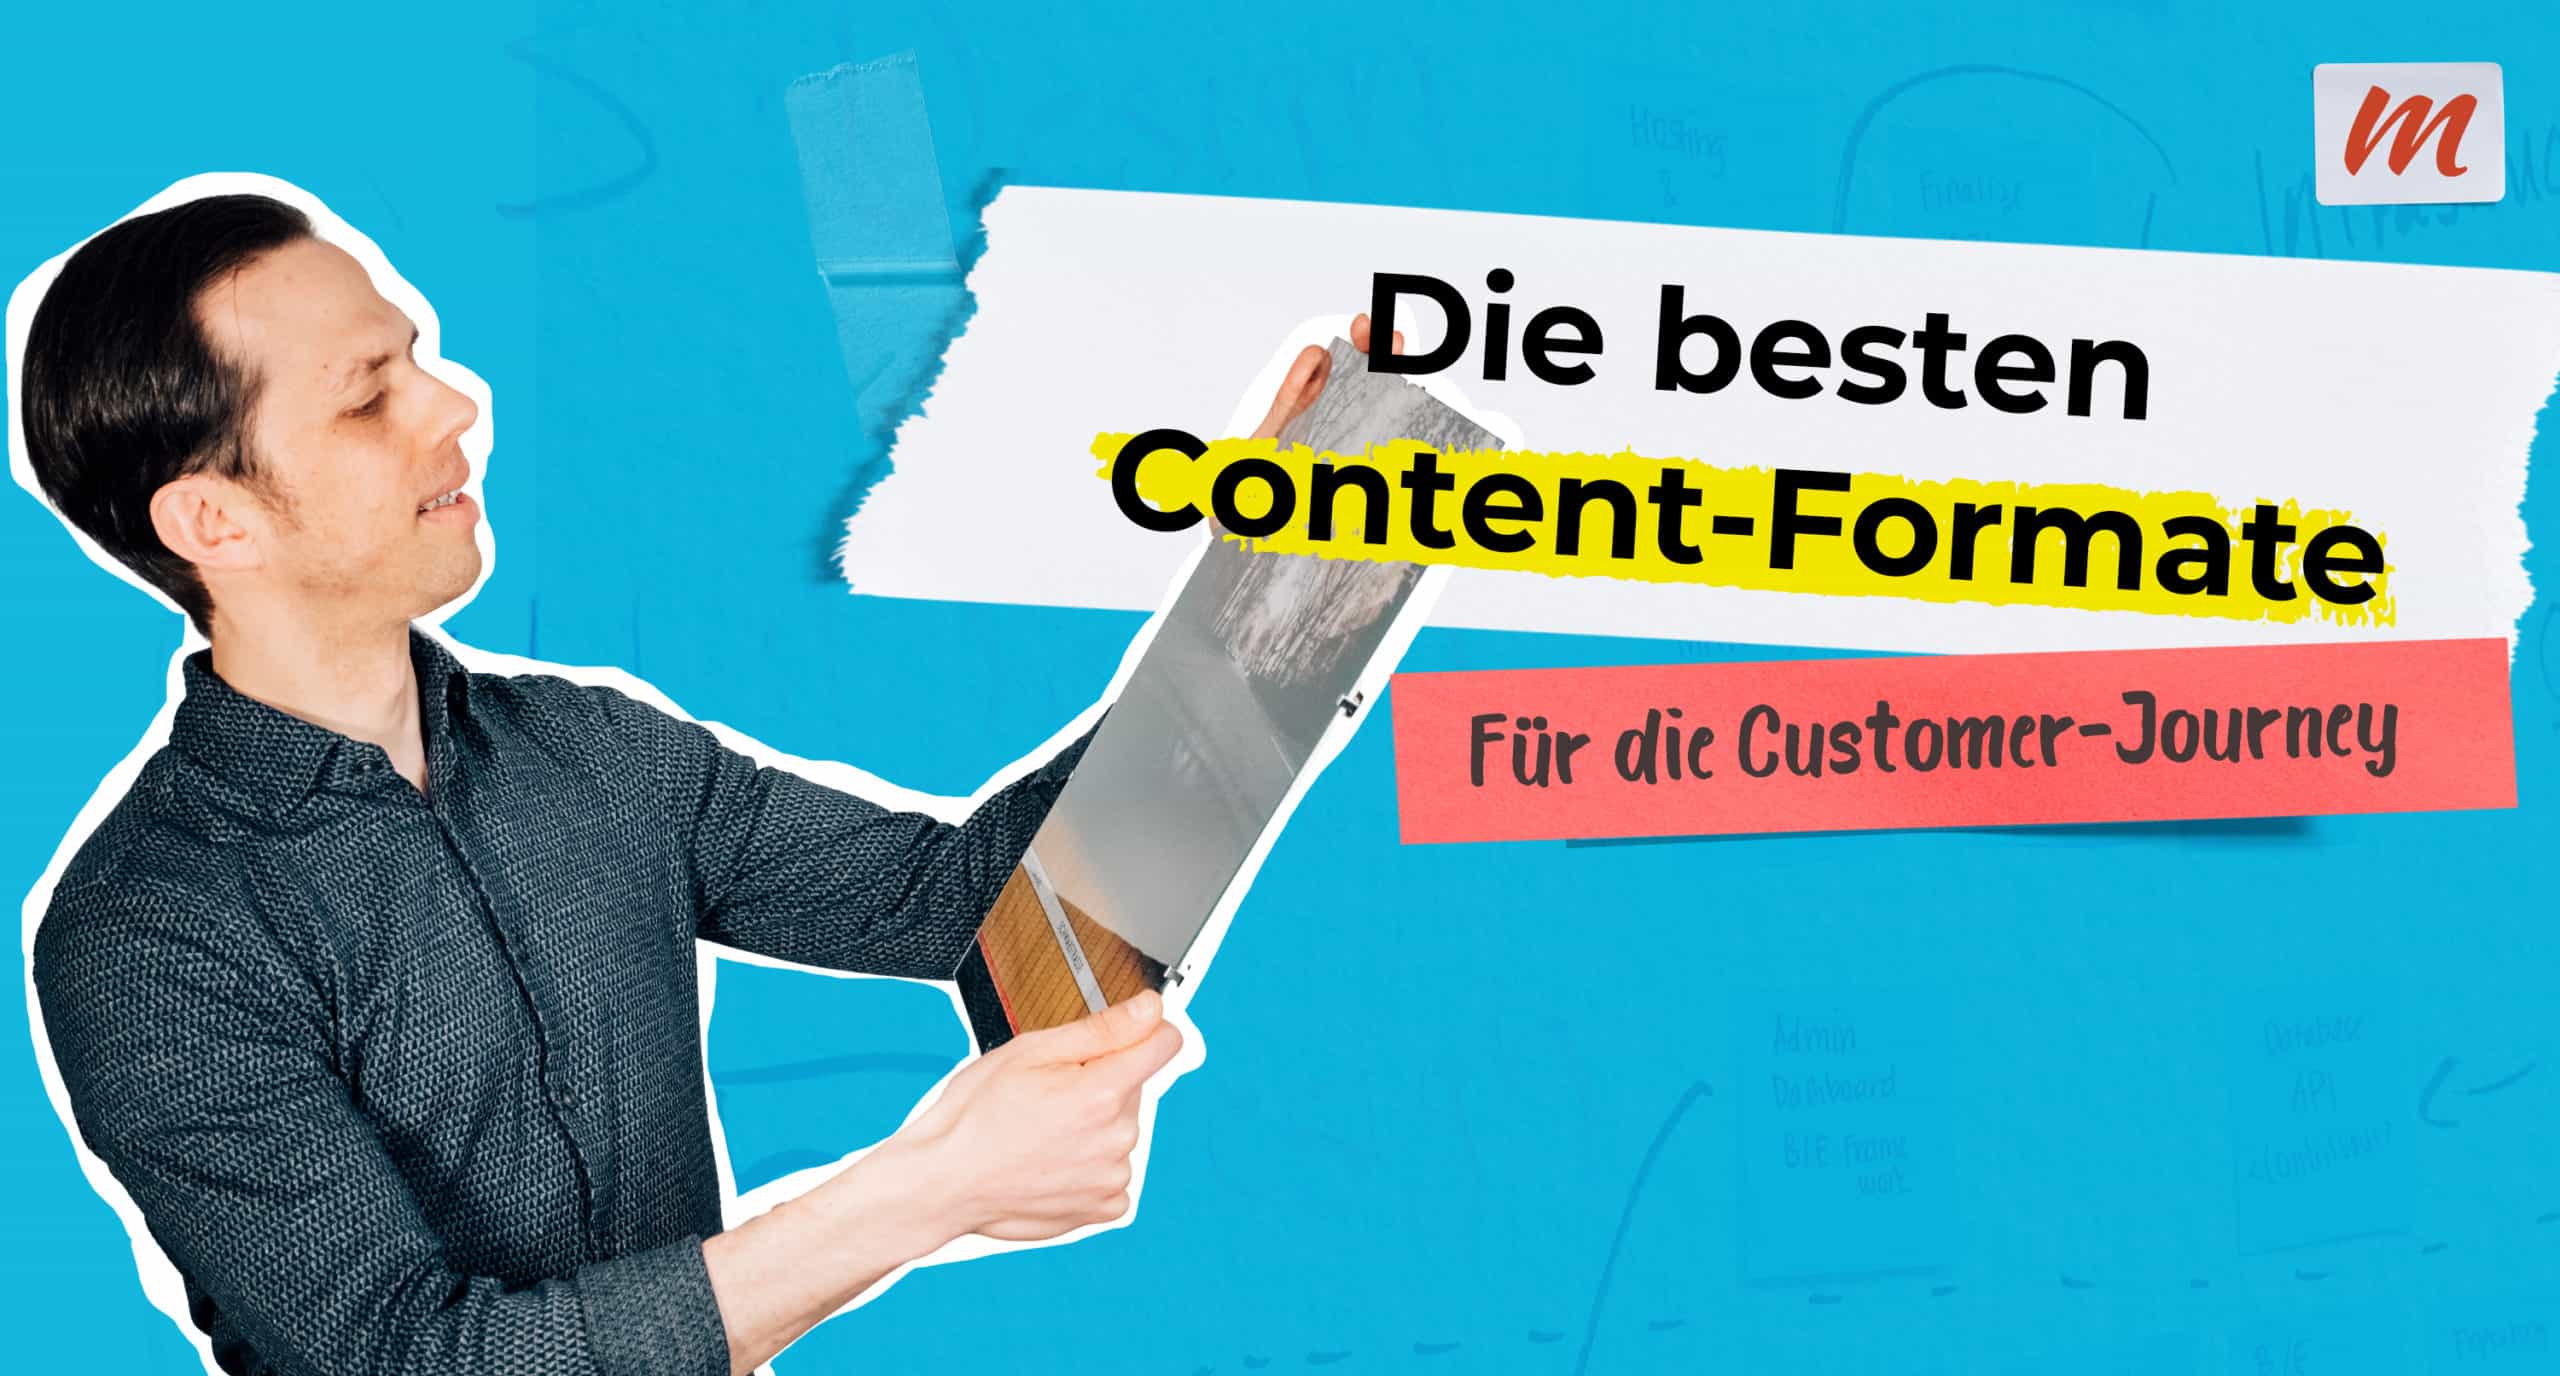 Content-Formate